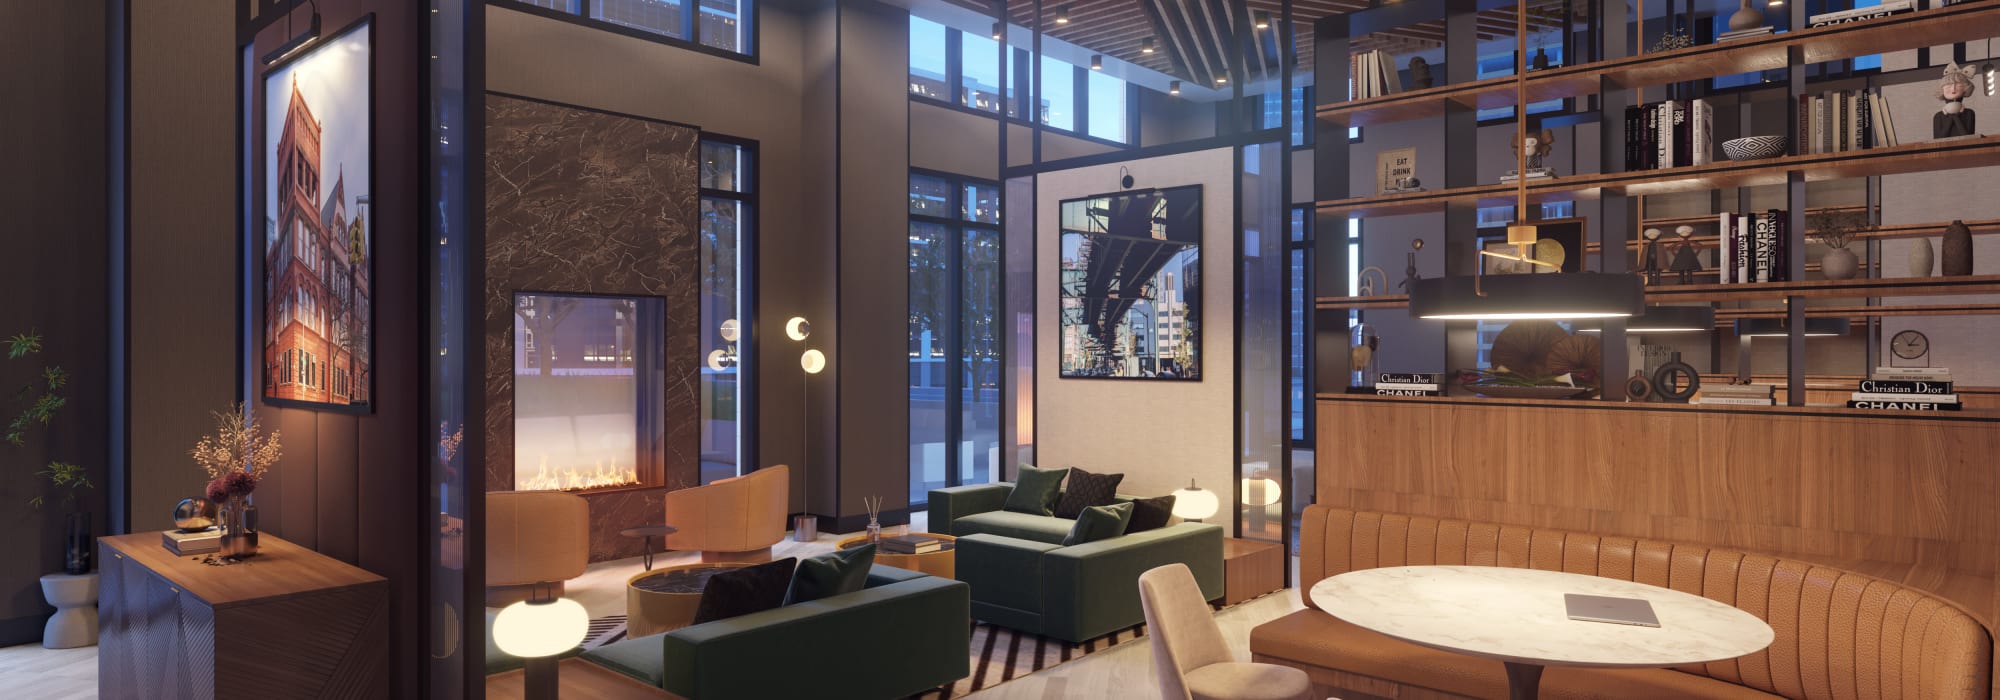 Rendering sitting area at the clubhouse at 8 Court Square in Long Island City, New York